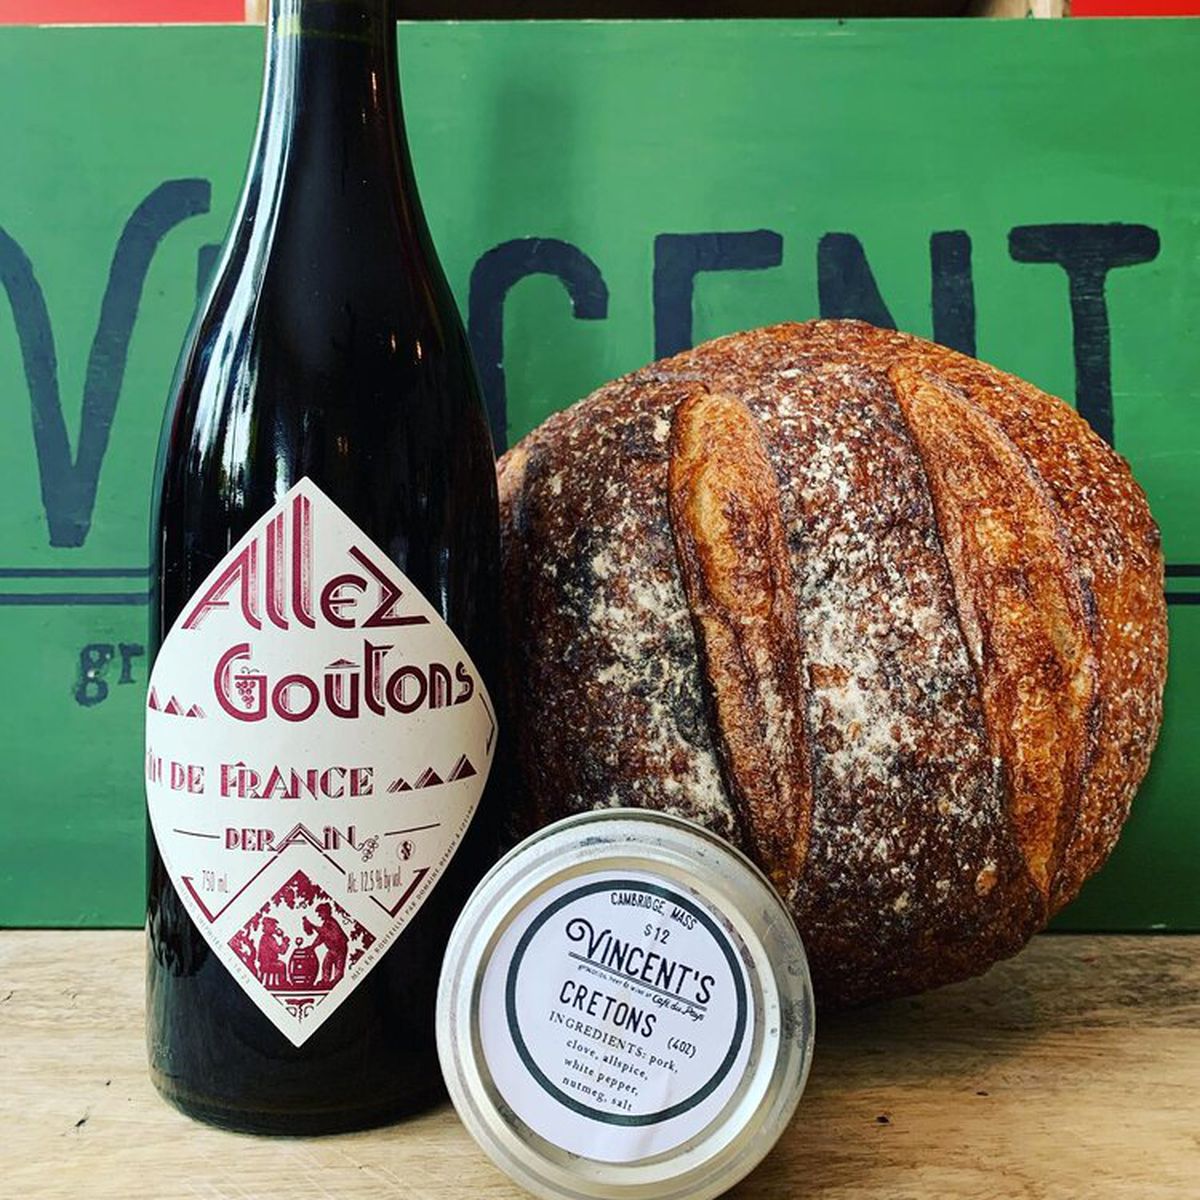 A wine bottle and fresh loaf of bread in front of a green sign that says Vincent’s